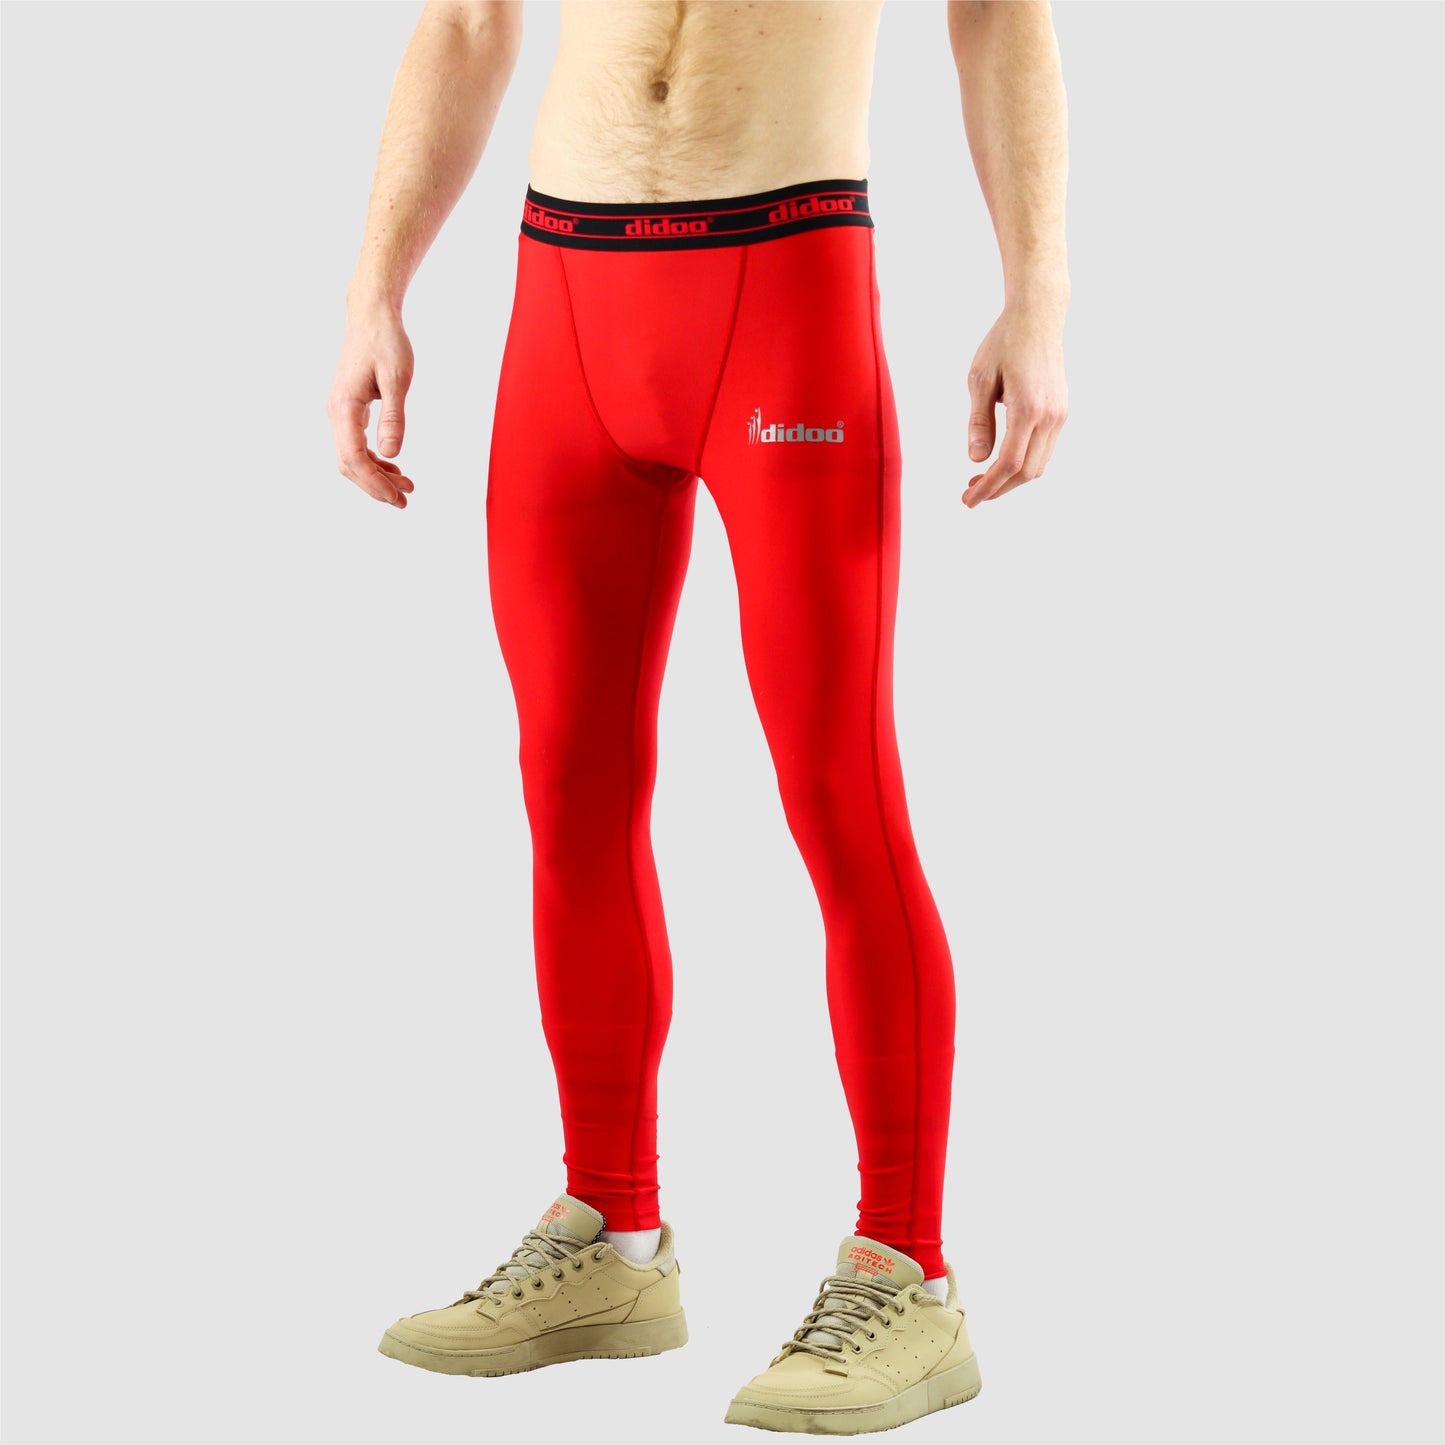 Red DiDOO Men's Compression Base Layer Leggings